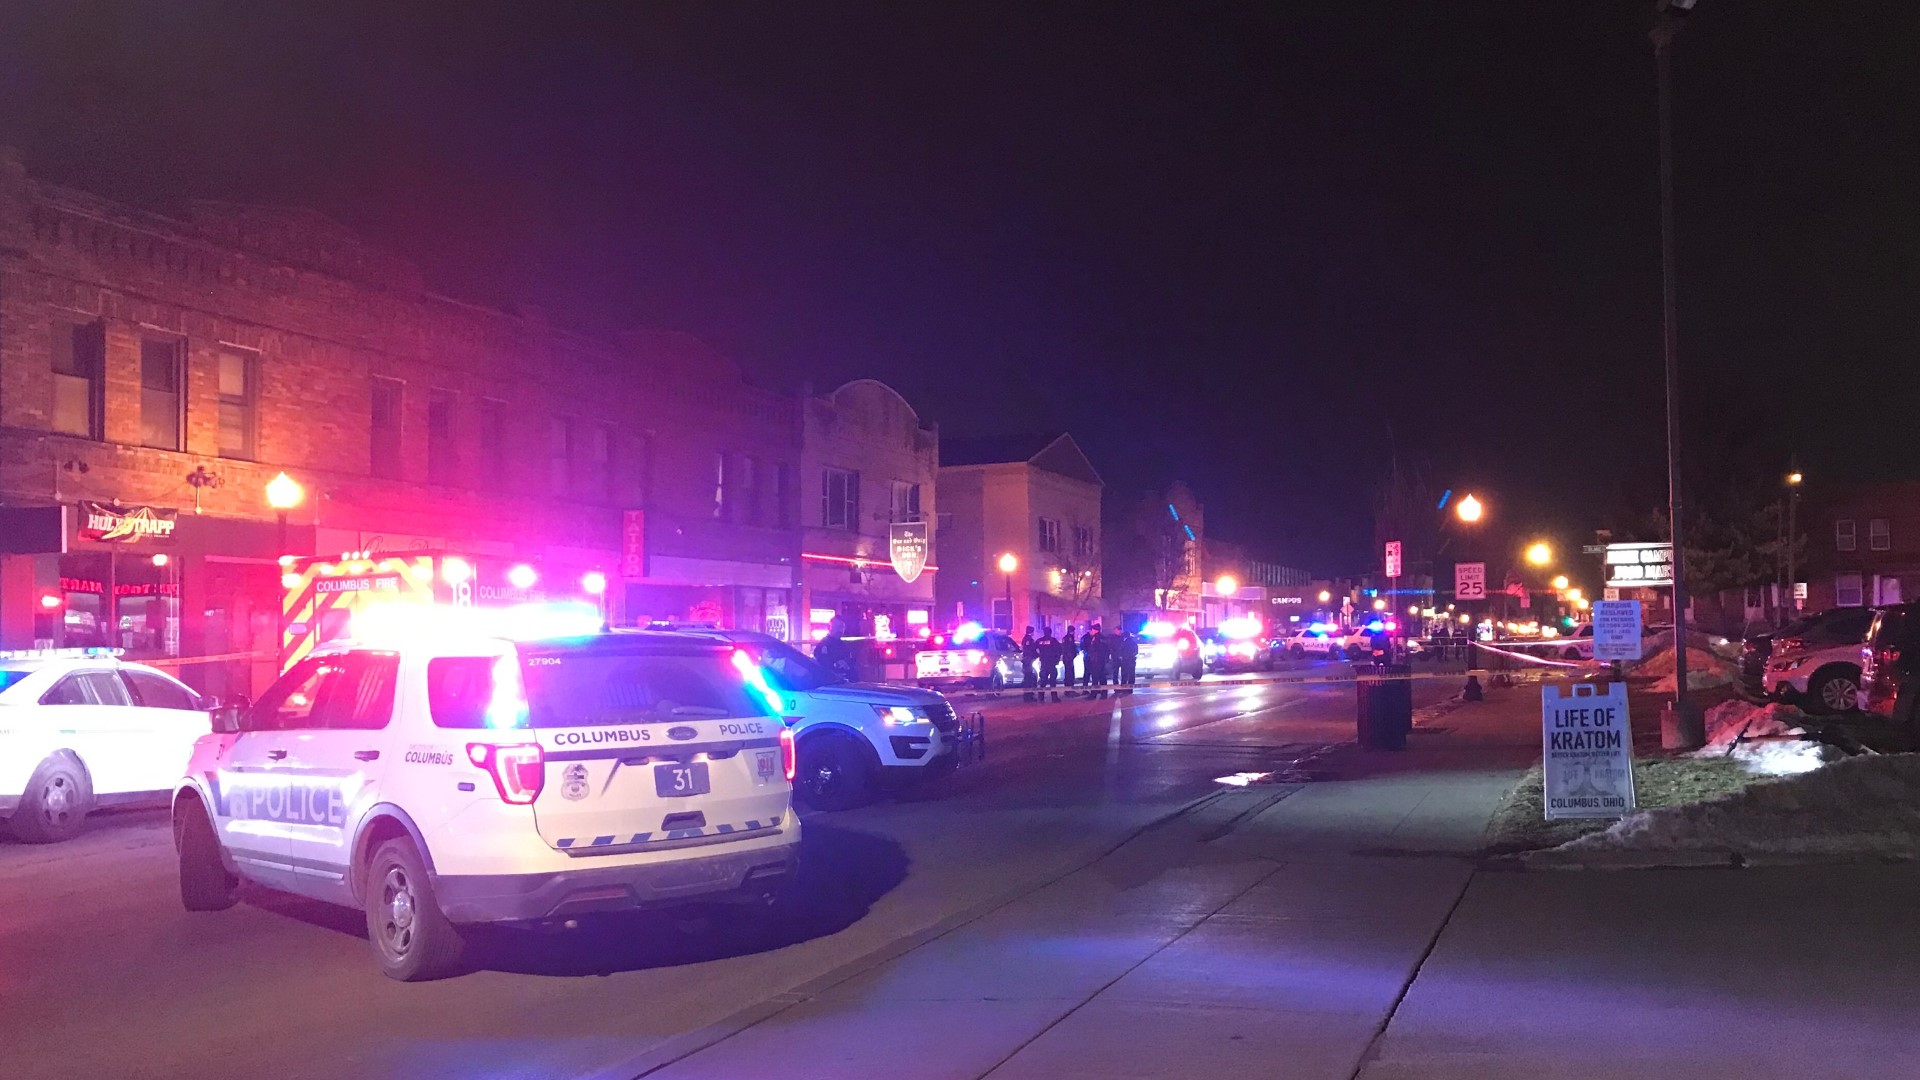 One person was shot in the area of Old North Columbus. The victim was taken to The Ohio State Wexner Medical Center in stable yet serious condition, police said.